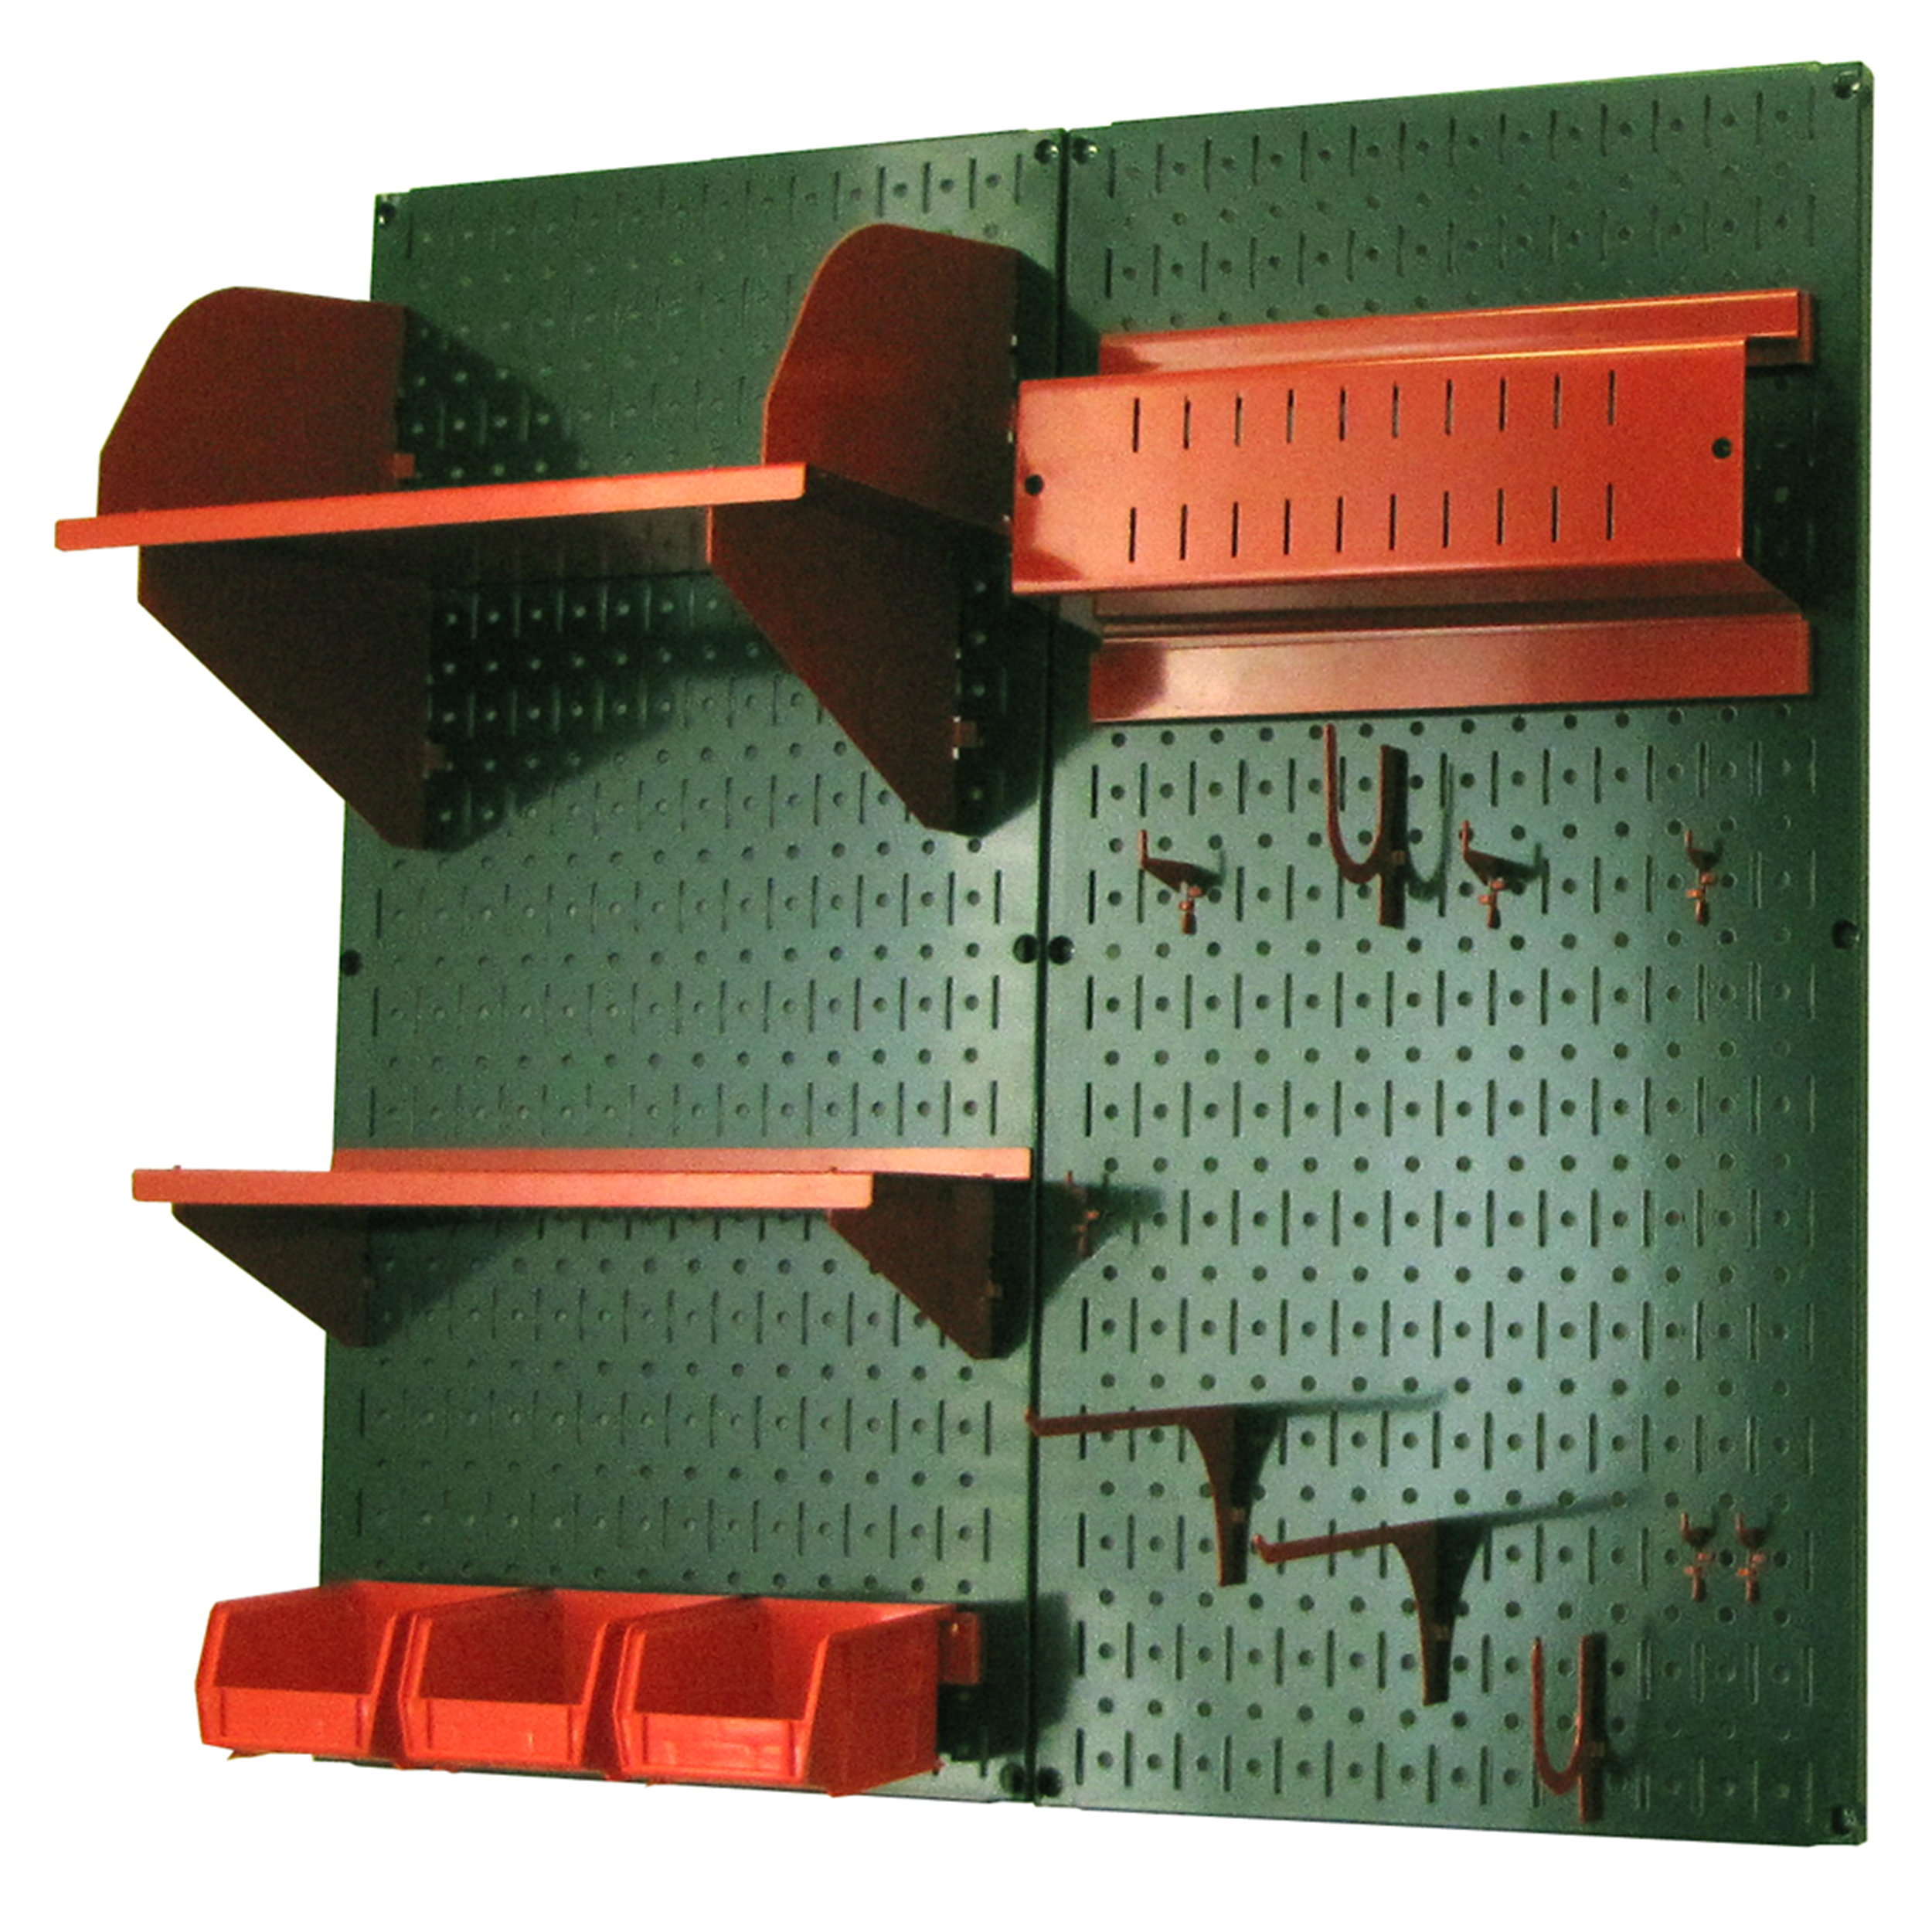 Pegboard Hobby Craft Pegboard Organizer Storage Kit With Green Pegboard And Red Accessories